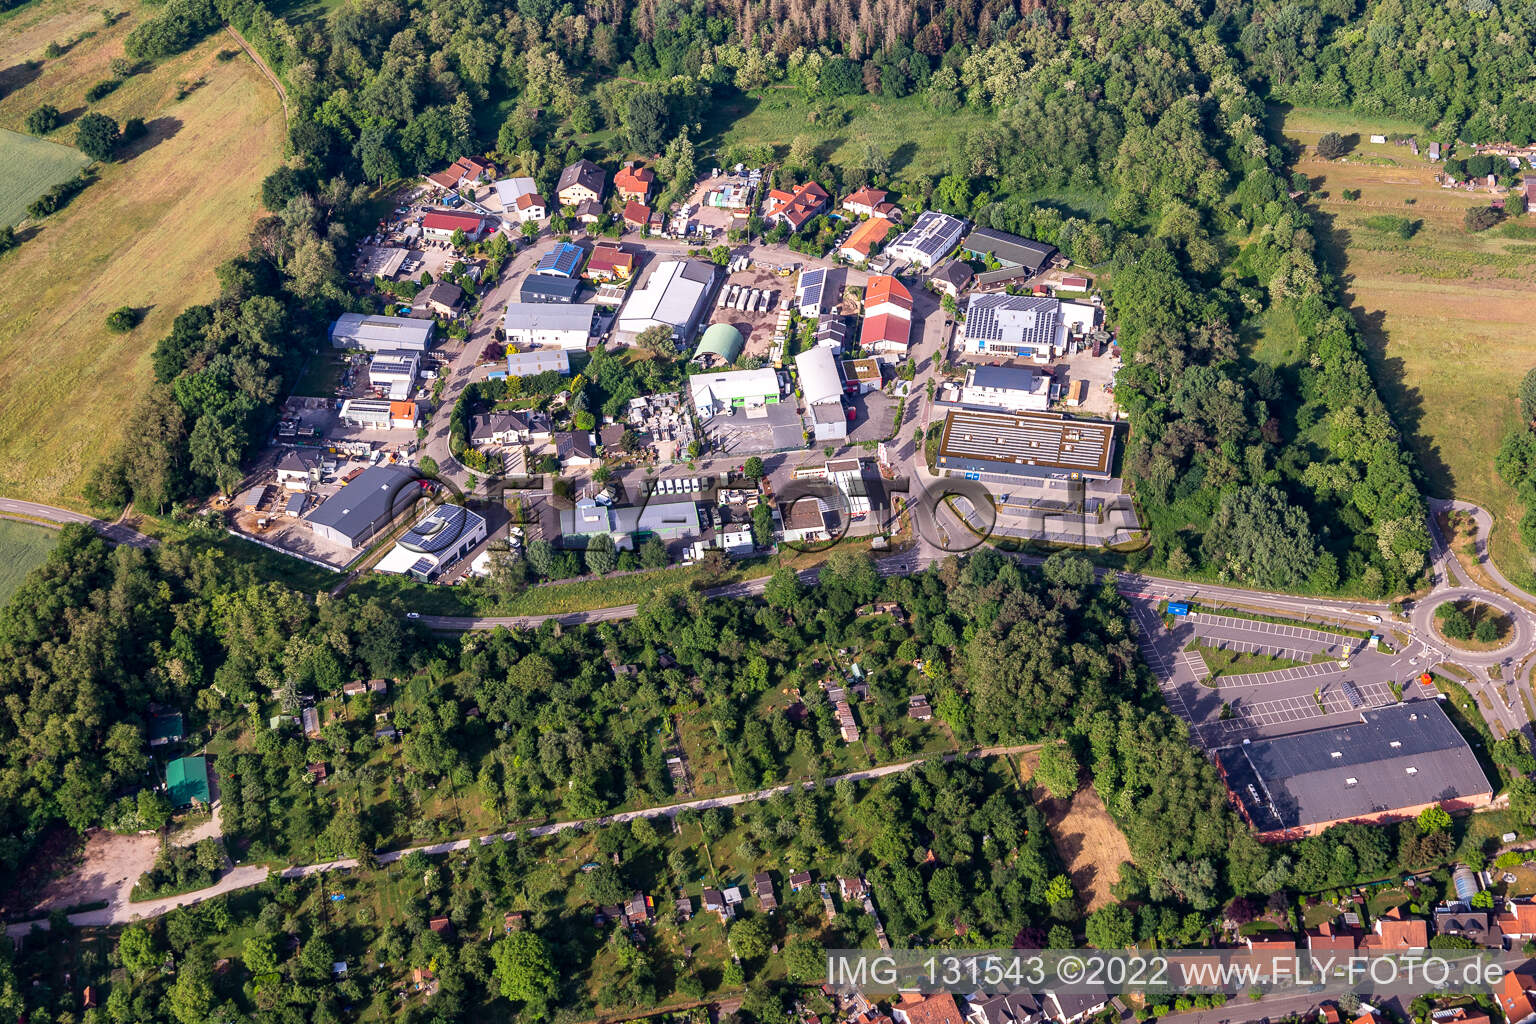 Oblique view of Mittelwegring commercial area in Jockgrim in the state Rhineland-Palatinate, Germany